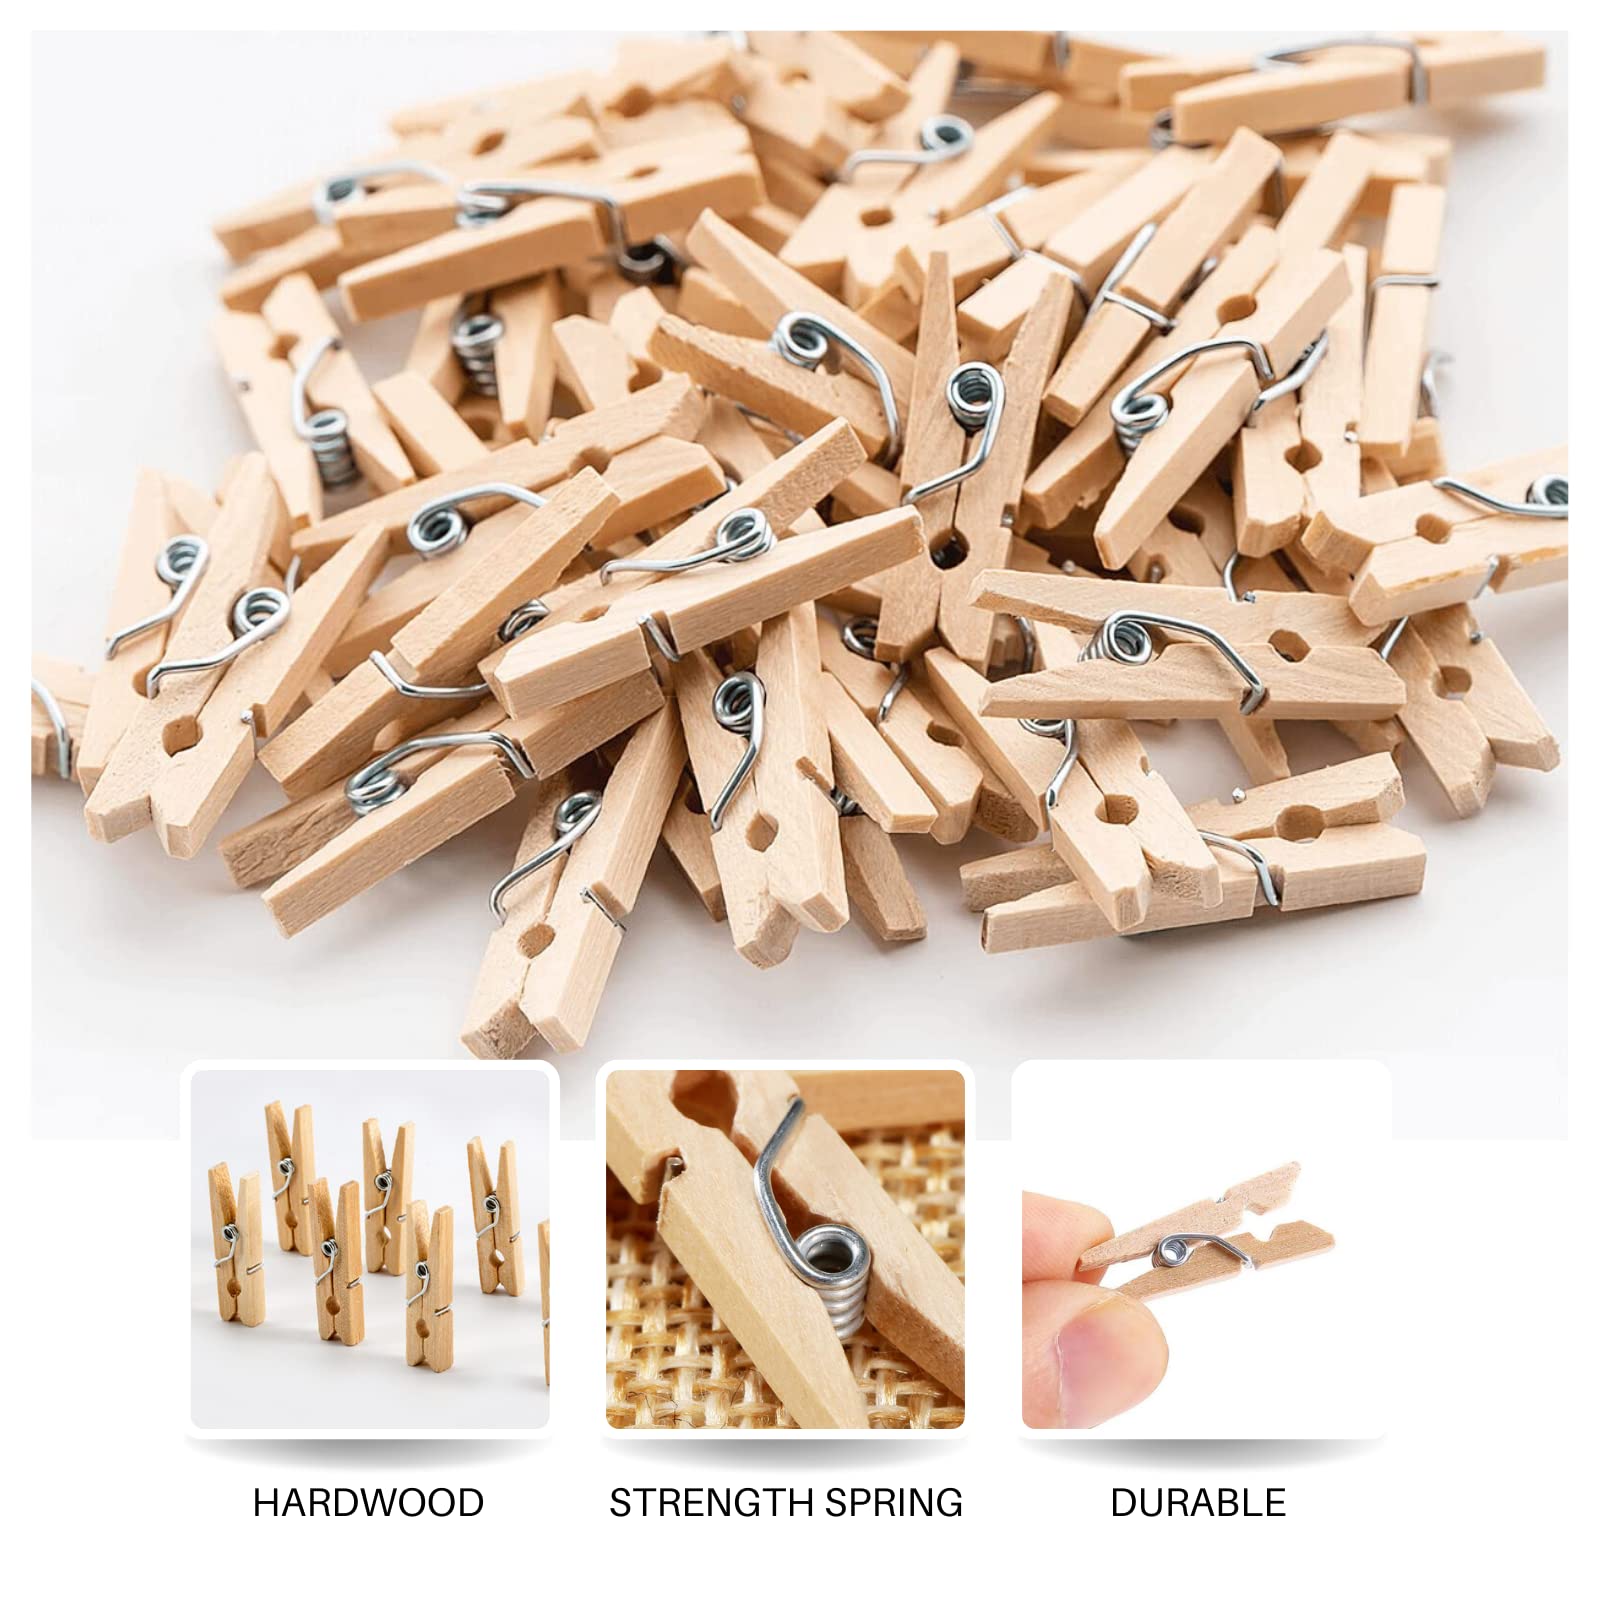 Mini Clothes Pins for Photo, Small Clothespins 200 pcs 1" Natural Wooden Mini Clothes Pins with Jute Twine, Mini Photo Clips Small Clothes Pins for Photos, Crafts, Arts, Cocktails